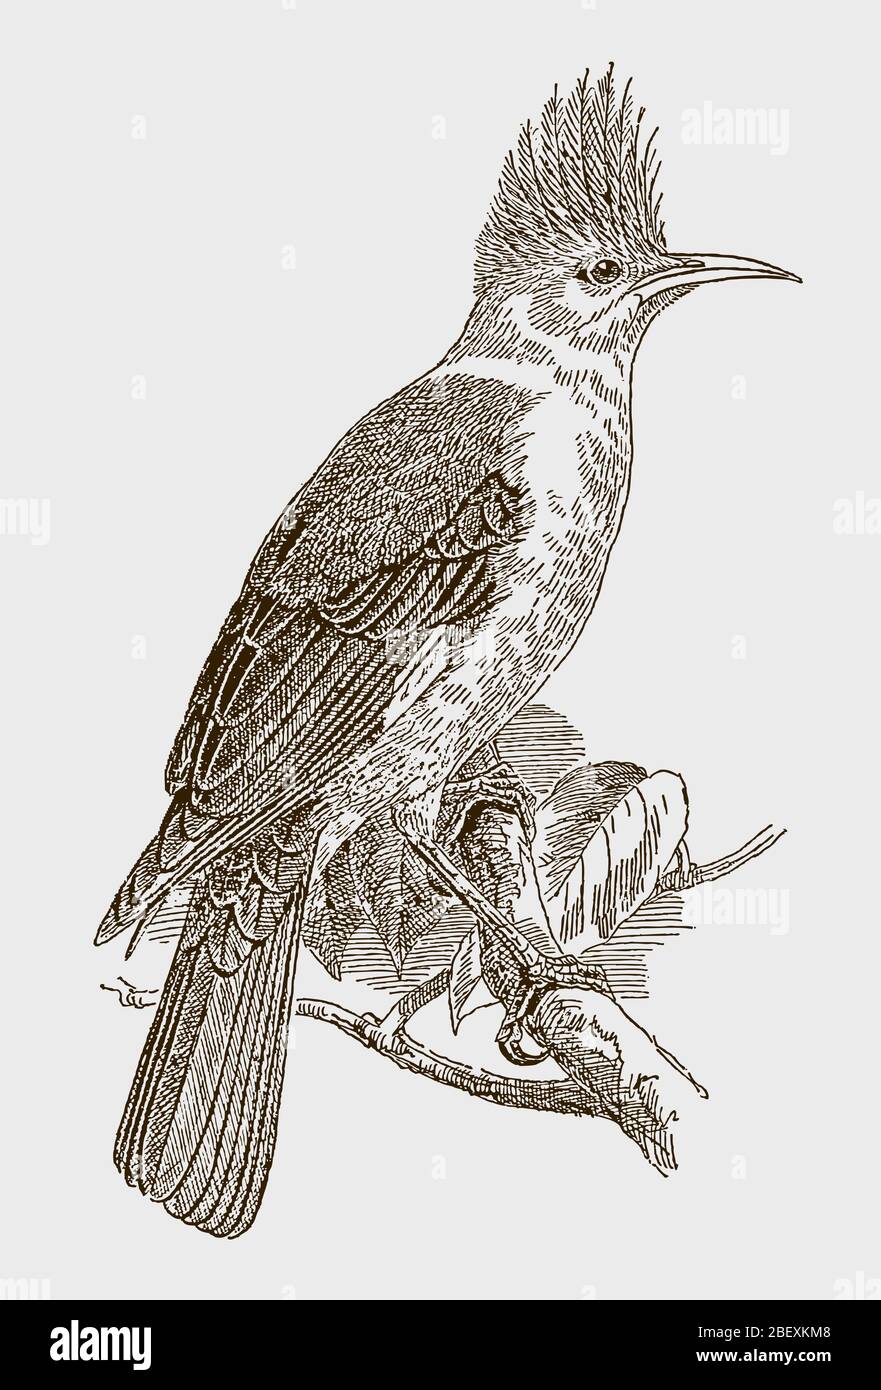 Hoopoe starling, fregilupus varius, an extinct bird from the mascarene islands in the indian ocean. Illustration after an engraving from the 19th cent Stock Vector